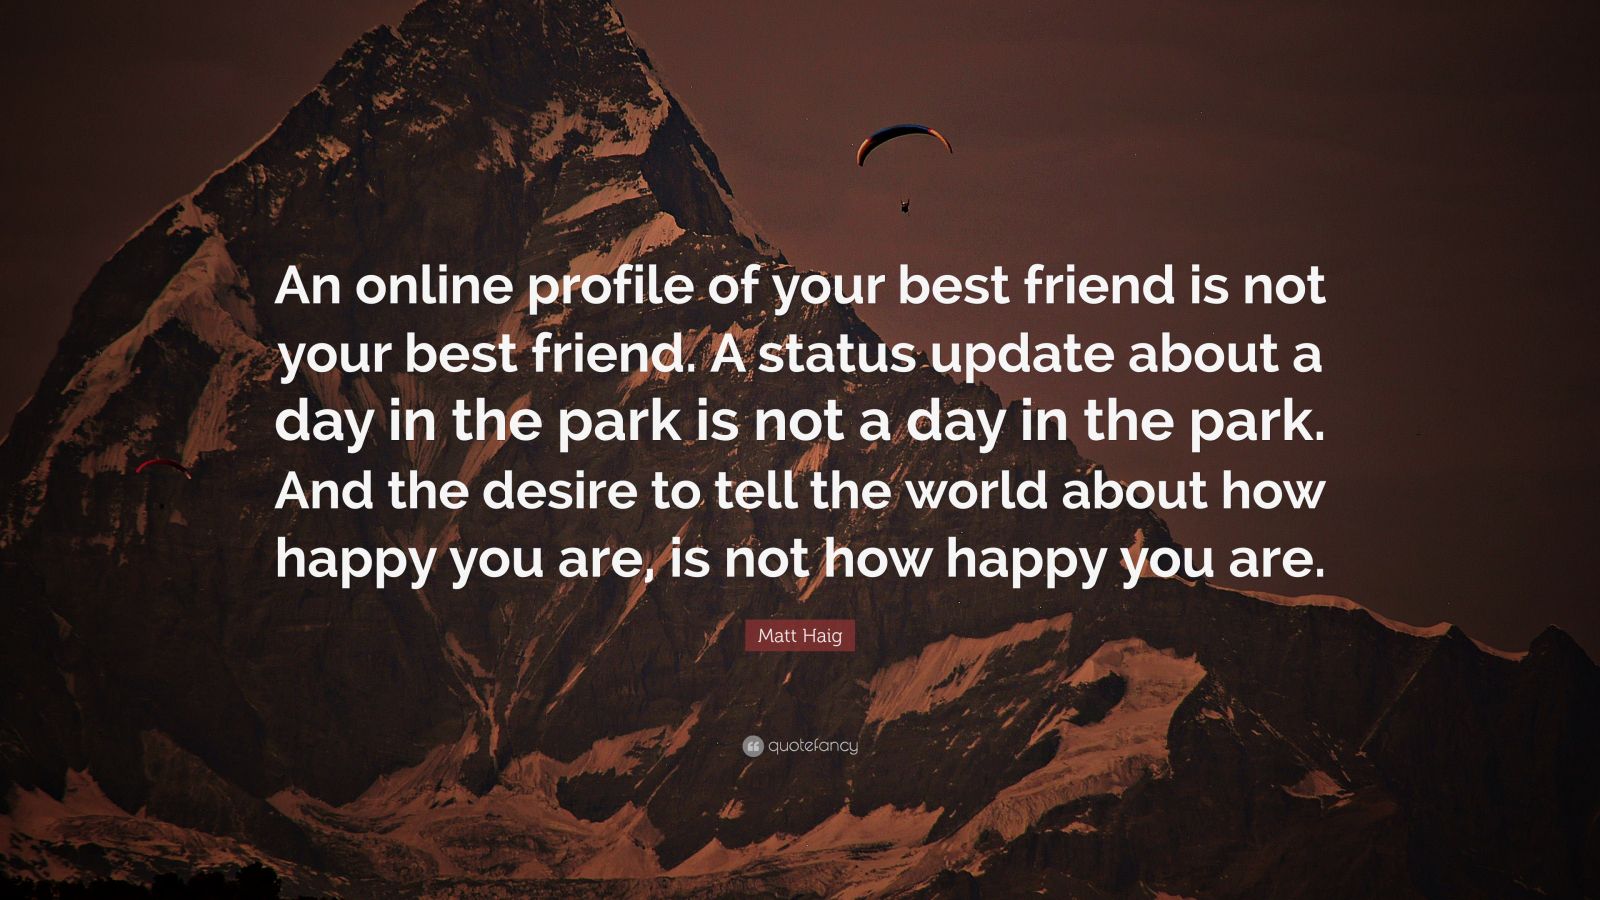 Matt Haig Quote: “An online profile of your best friend is not your best  friend. A status update about a day in the park is not a day in t”